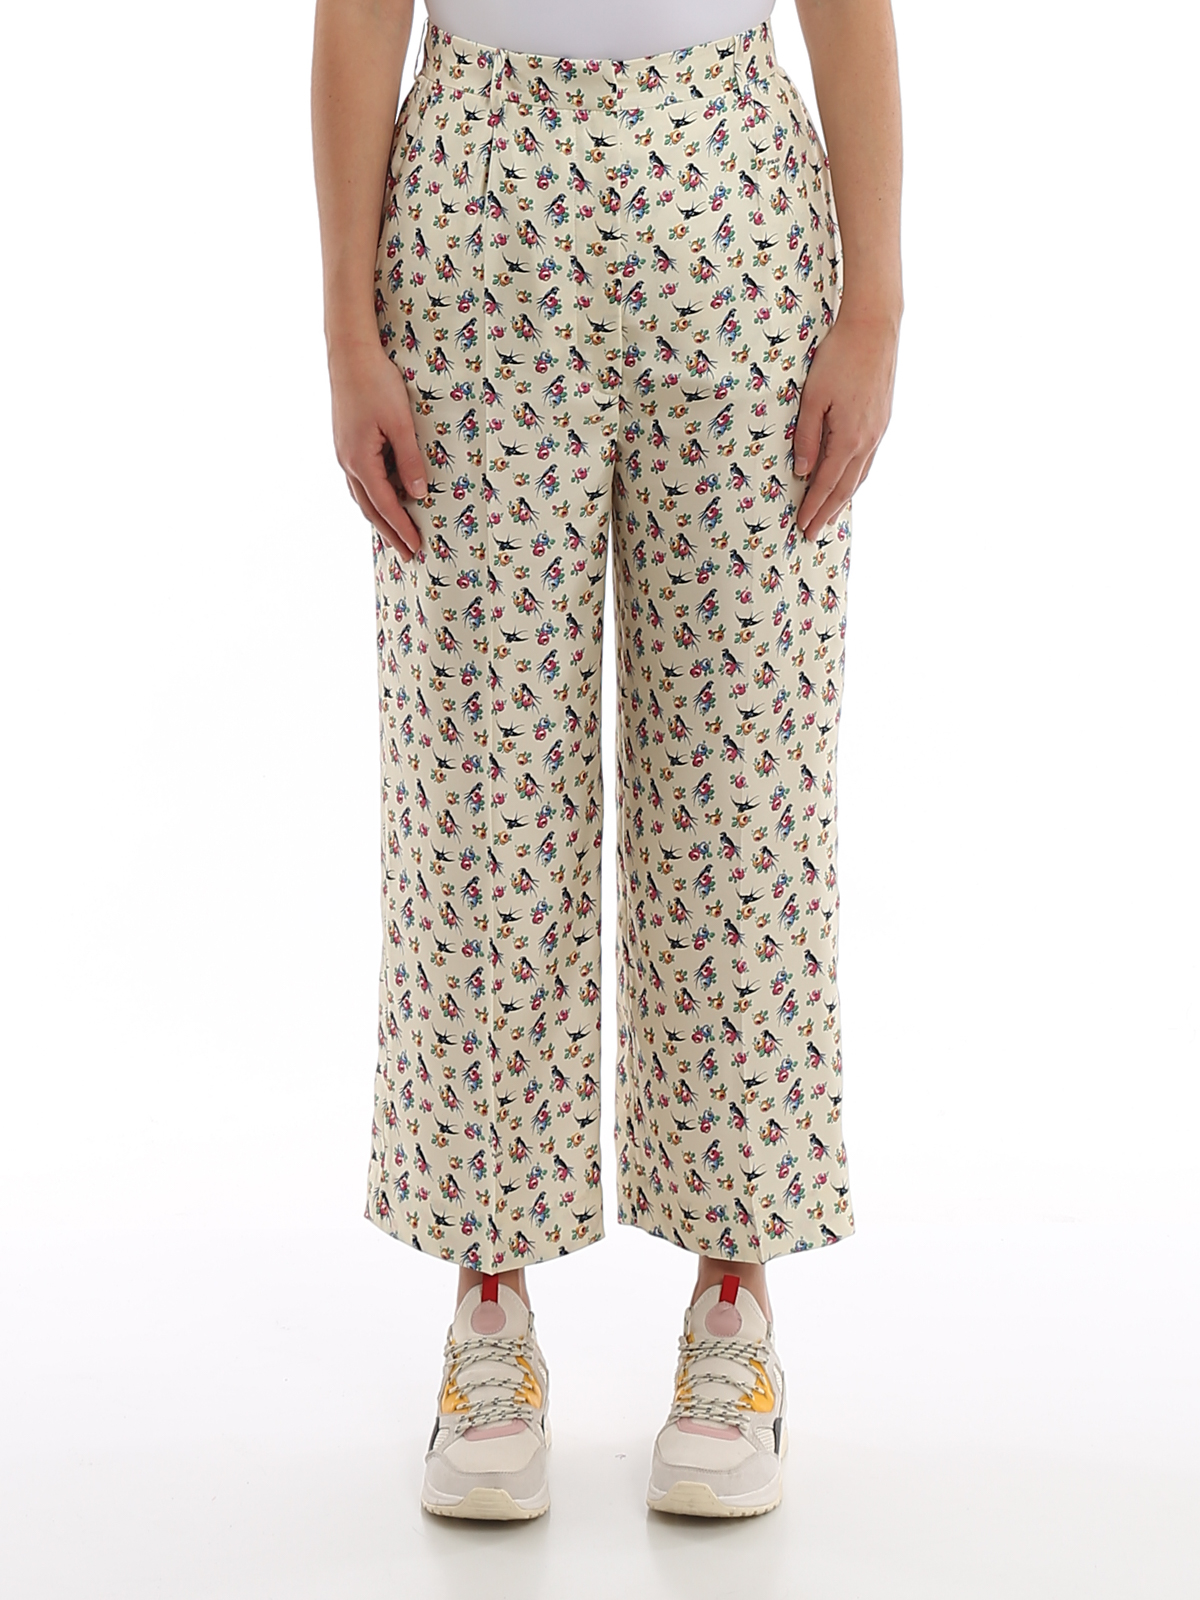 Prada Flower  and swallow  patterned pants casual 